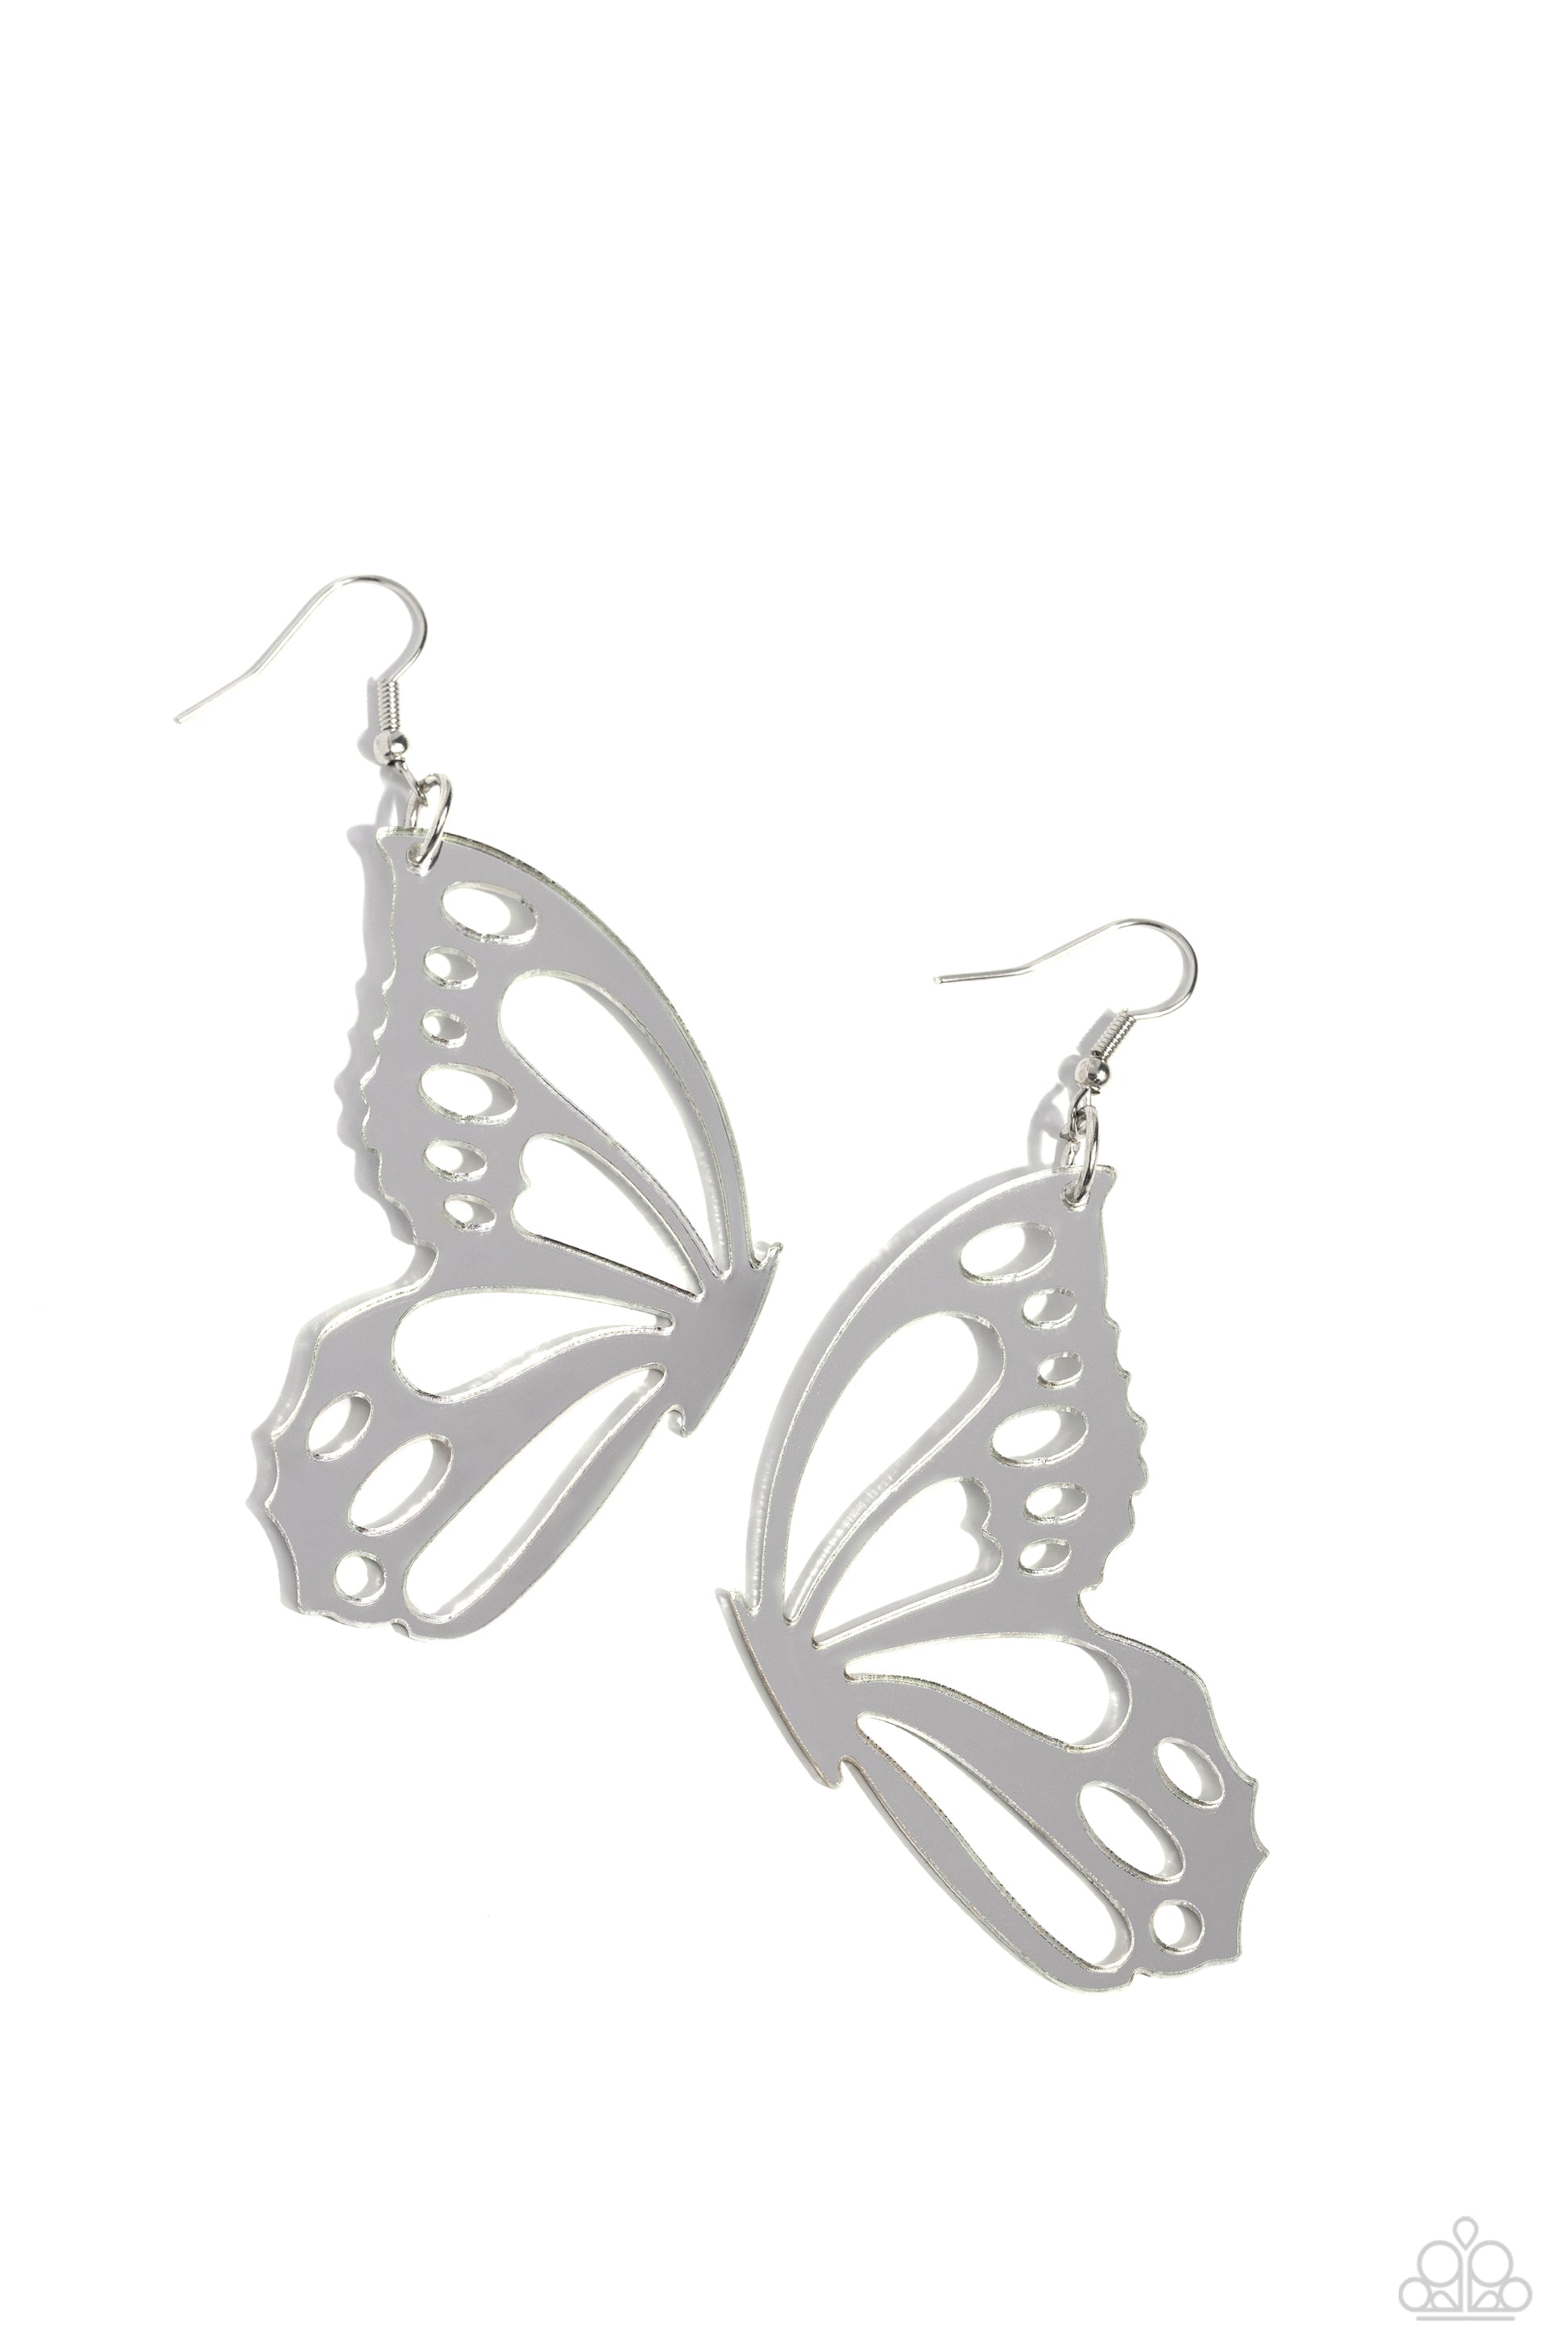 WING of the World Silver Butterfly Earring - Paparazzi Accessories  Splashed in a metallic silver hue, an oversized butterfly wing with airy cutout details dangles from the ear, creating a whimsically colorful sight. Earring attaches to a standard fishhook fitting.  Sold as one pair of earrings.  P5WH-SVXX-281XX